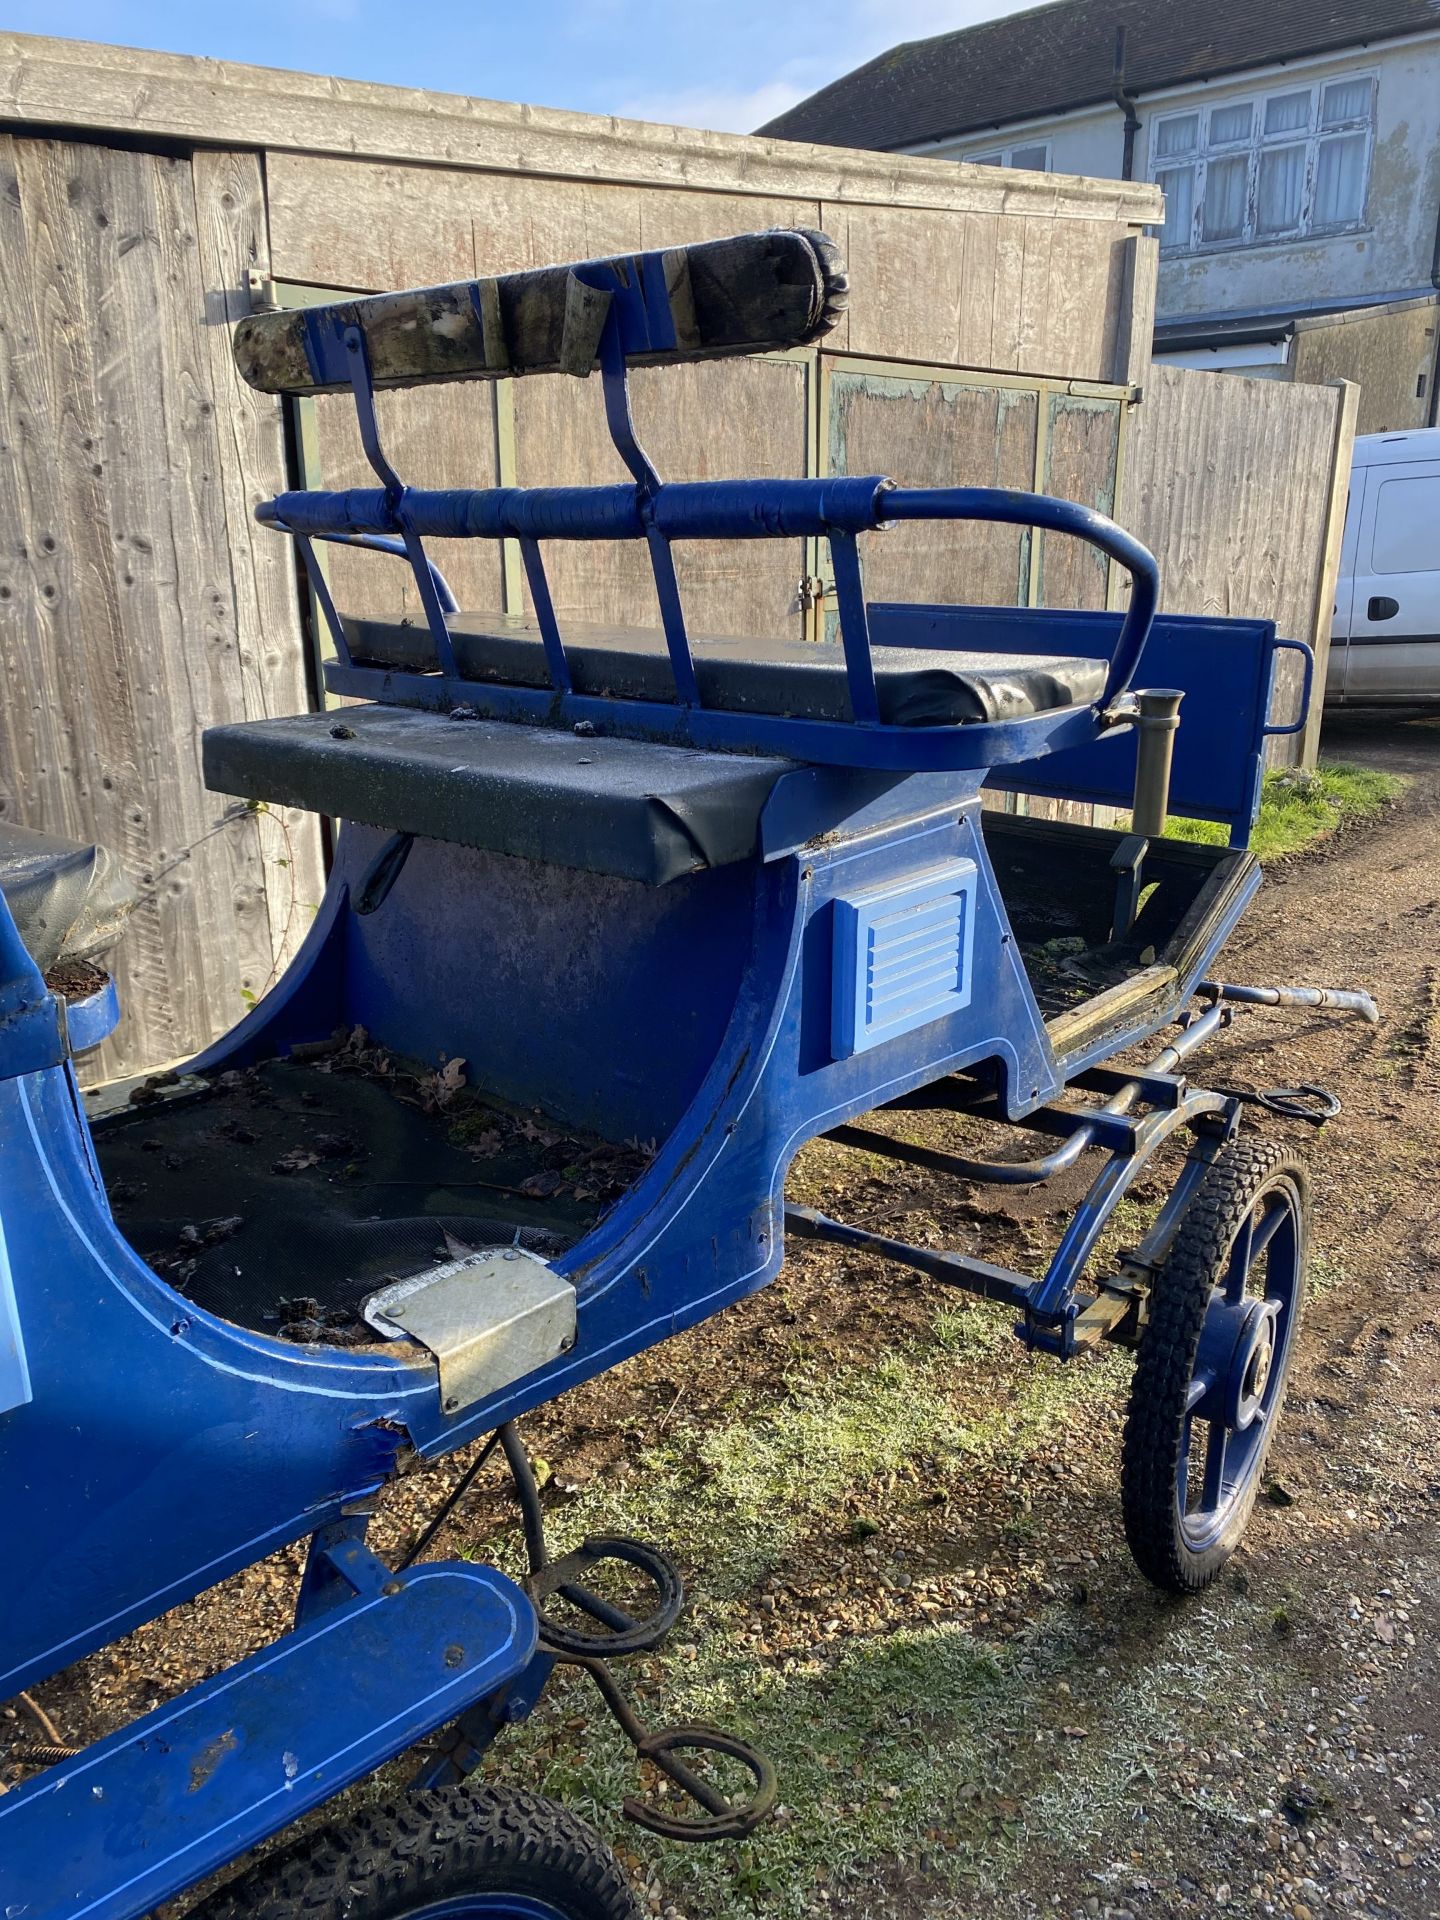 PHAETON to suit single cob. Painted Royal blue with light blue lining, the 2 rows of seats and - Bild 3 aus 5